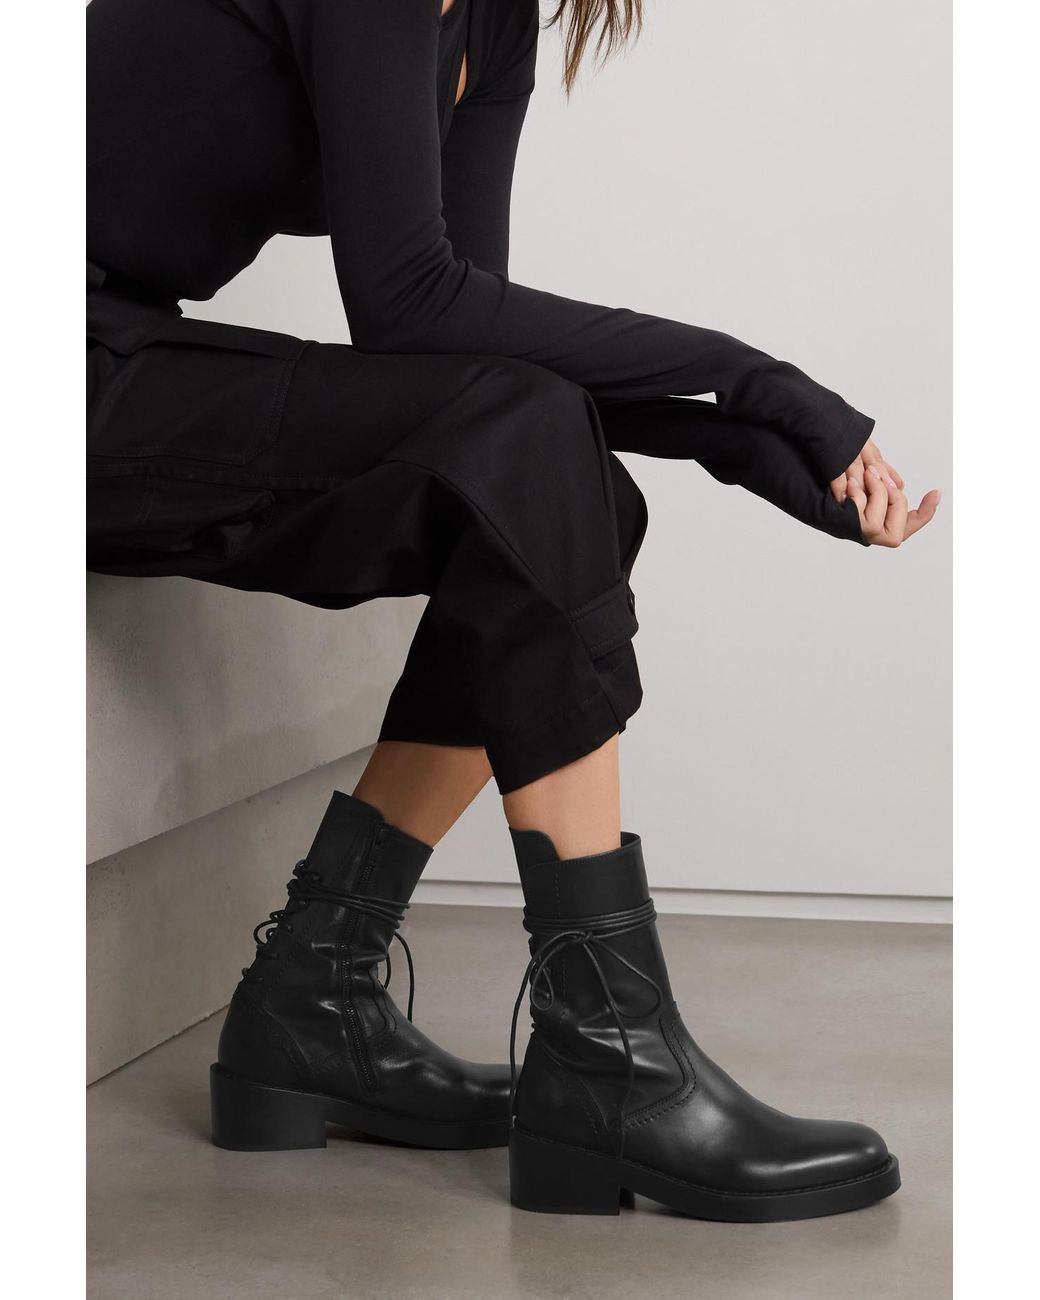 Ann Demeulemeester Henrica Leather Ankle Boots in Black | Lyst UK